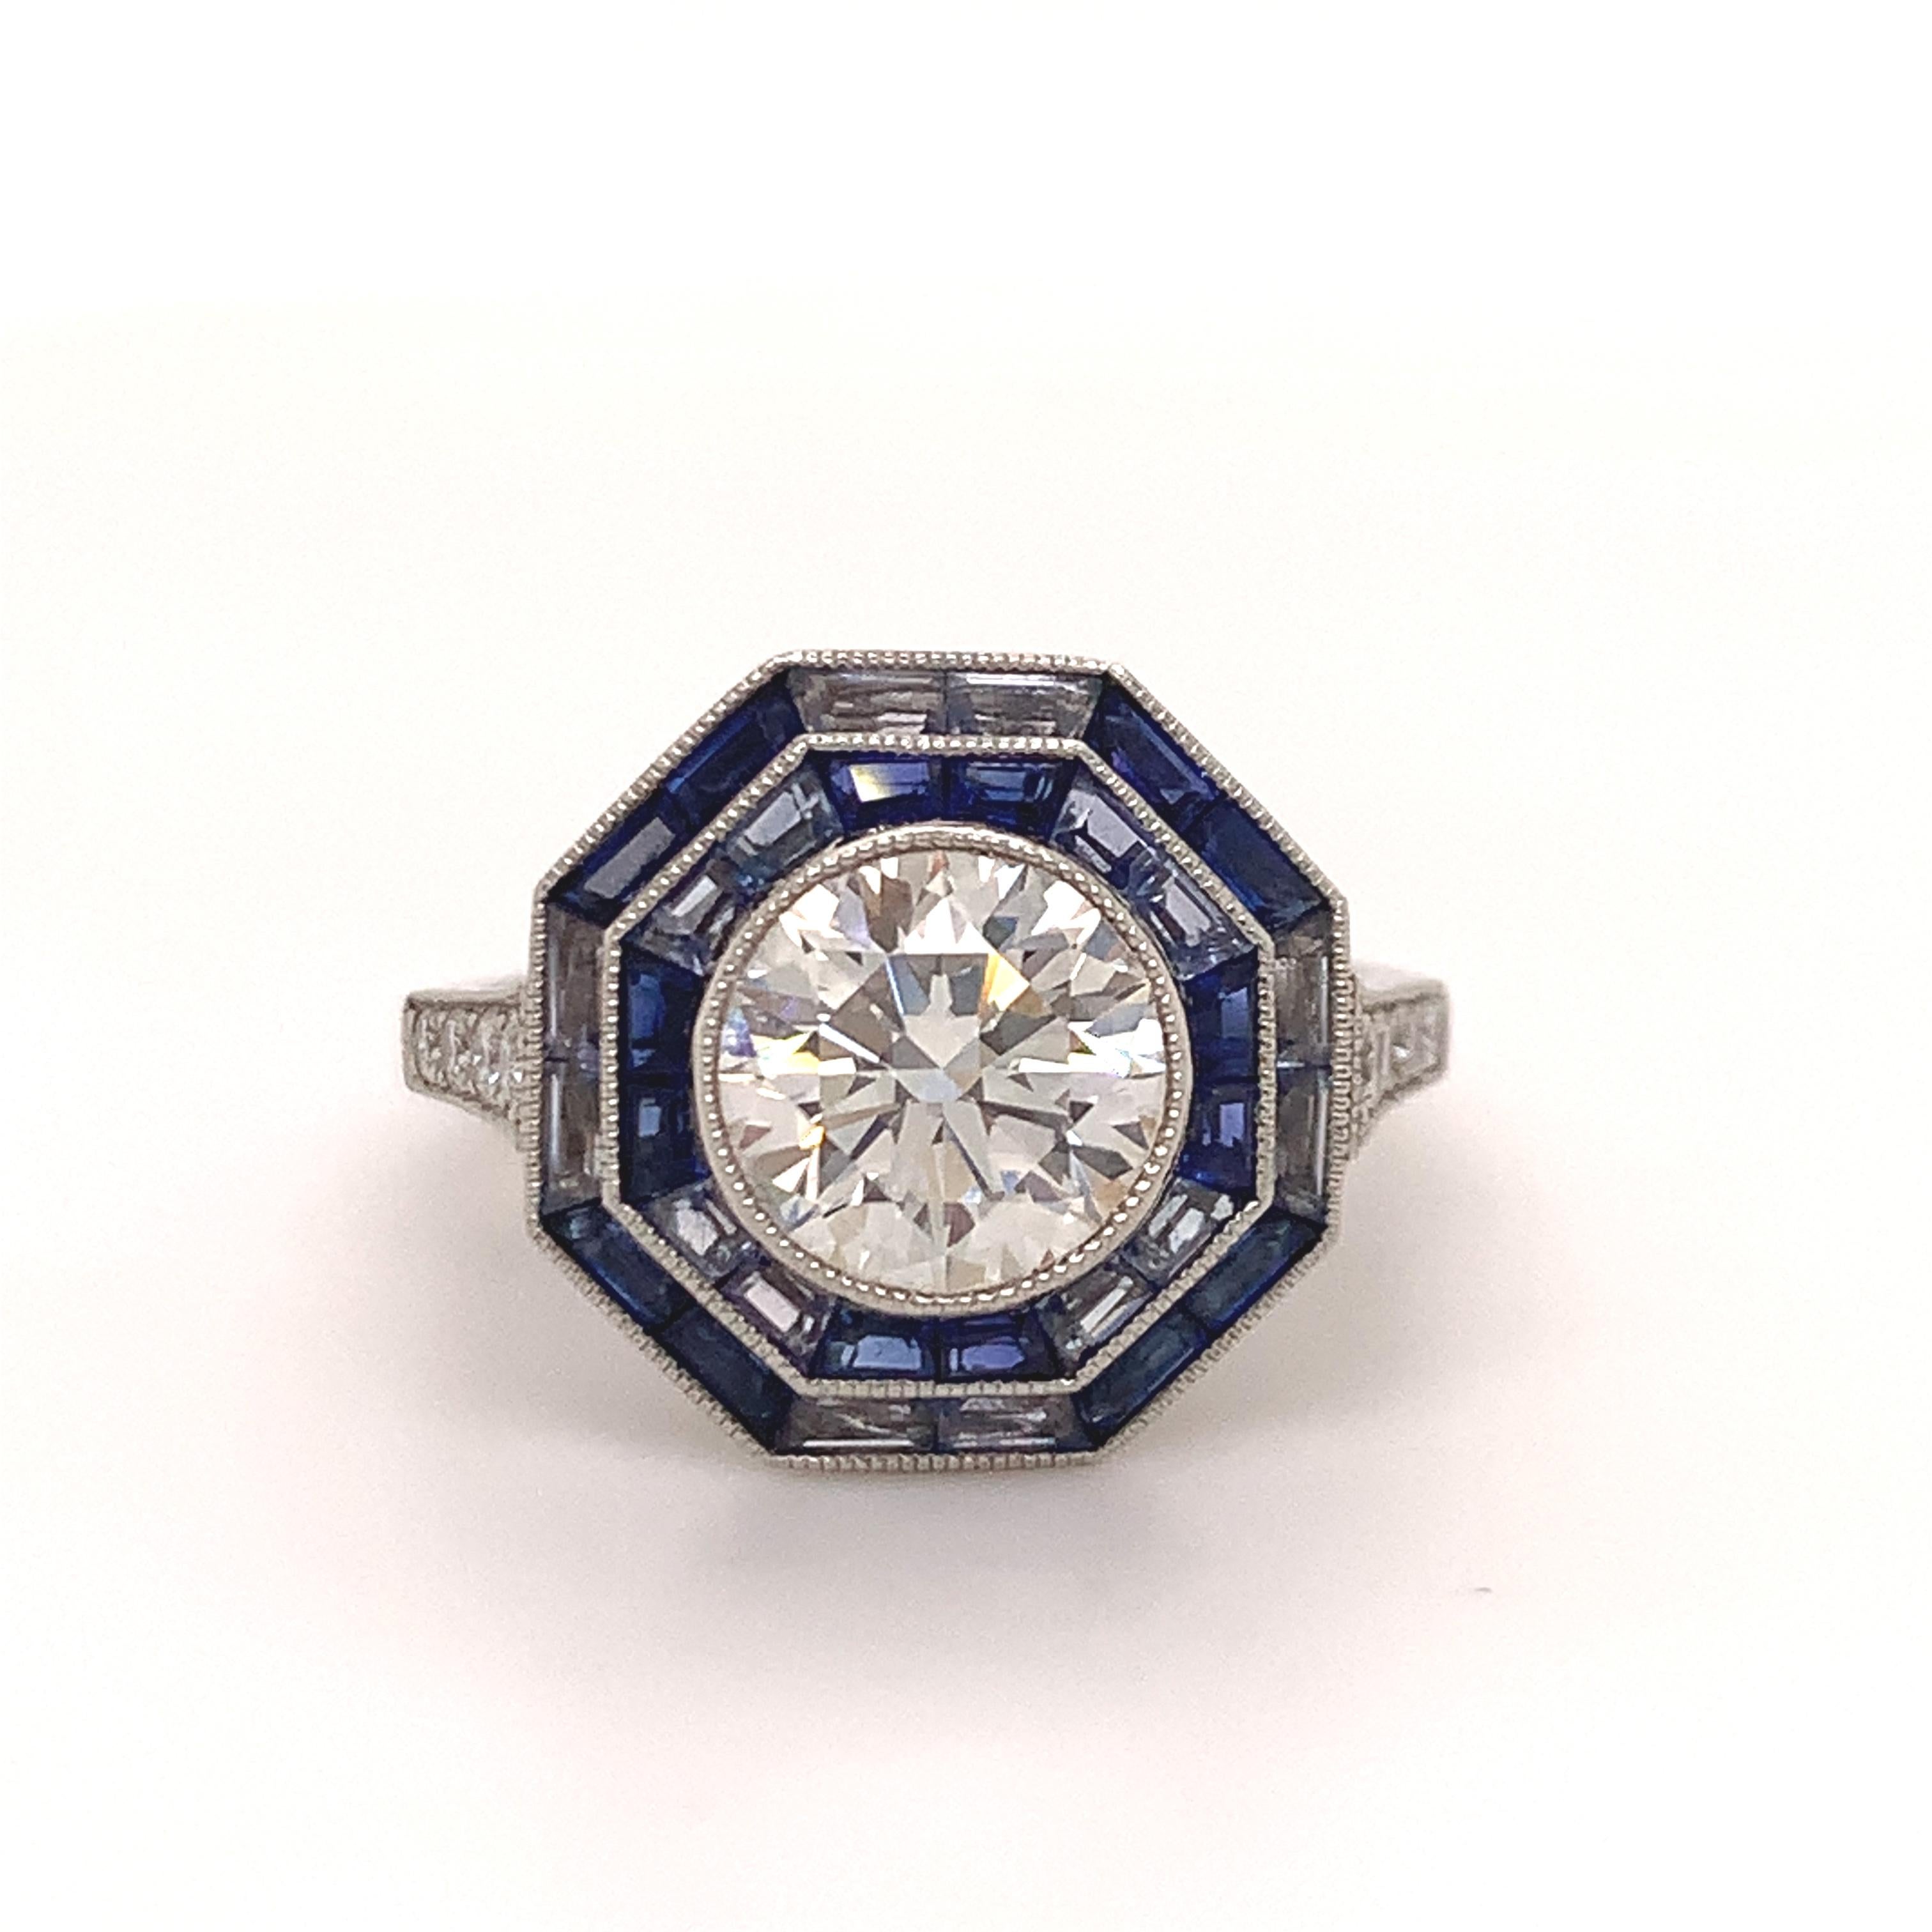 Gorgeous ring made and signed by Tiffany & Co. Platinum, diamond and sapphire octagonal ring with milgrain beading.  Center Round brilliant cut diamond weighing 1.78cts, G color, VVS2 clarity, surrounded by a double row, set with 30 calibre cut